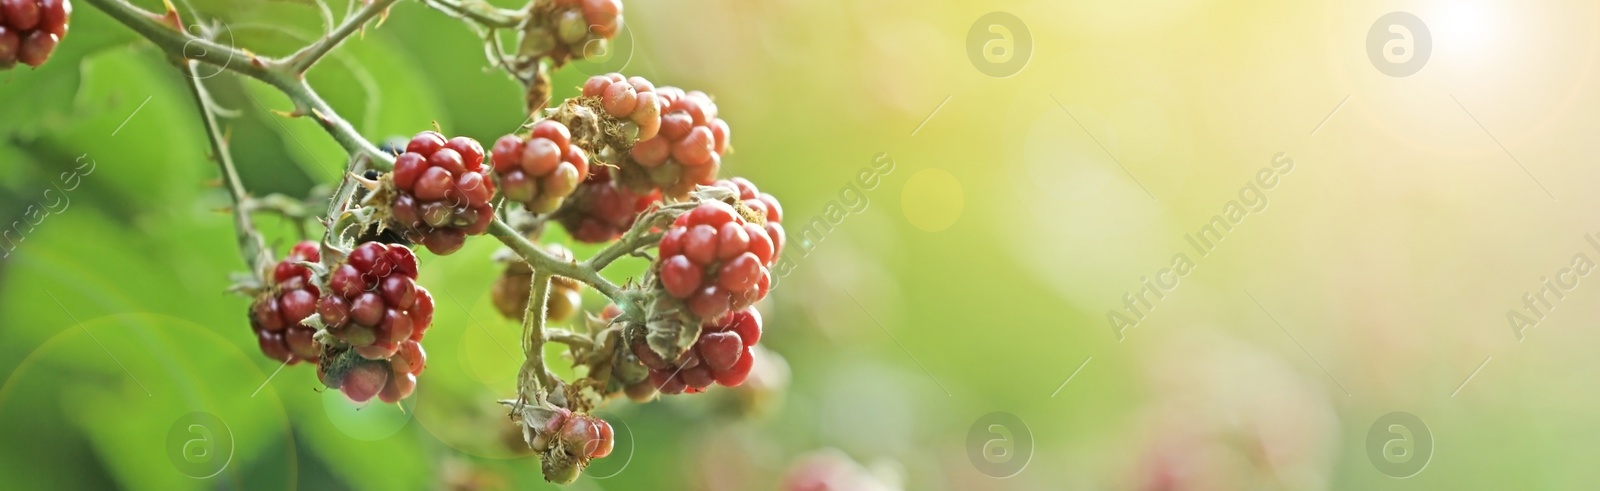 Image of Ripening blackberries on branch against blurred background, closeup. Banner design with space for text